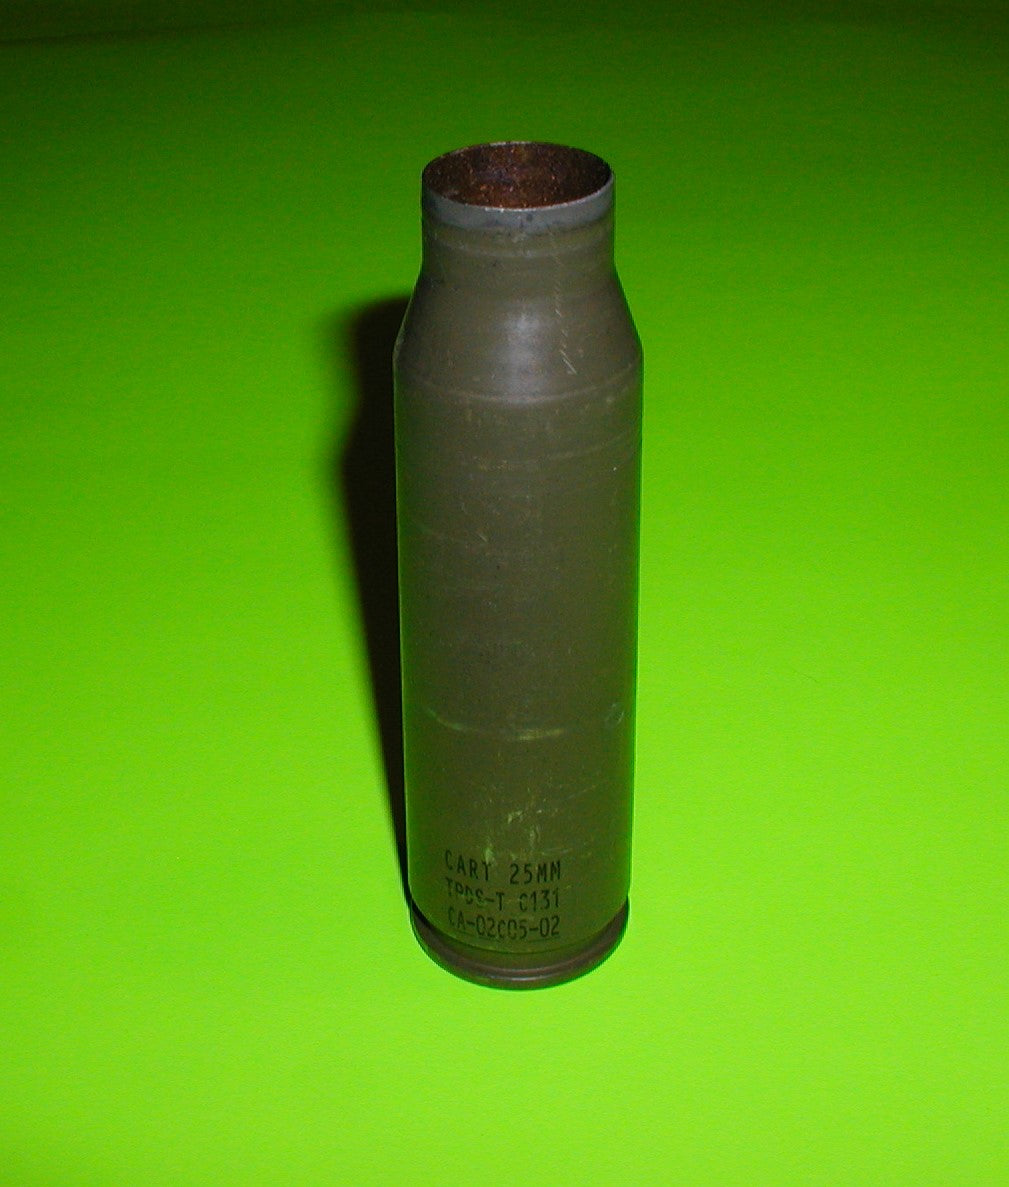 25mm x 137mm NATO, once fired, empty casing